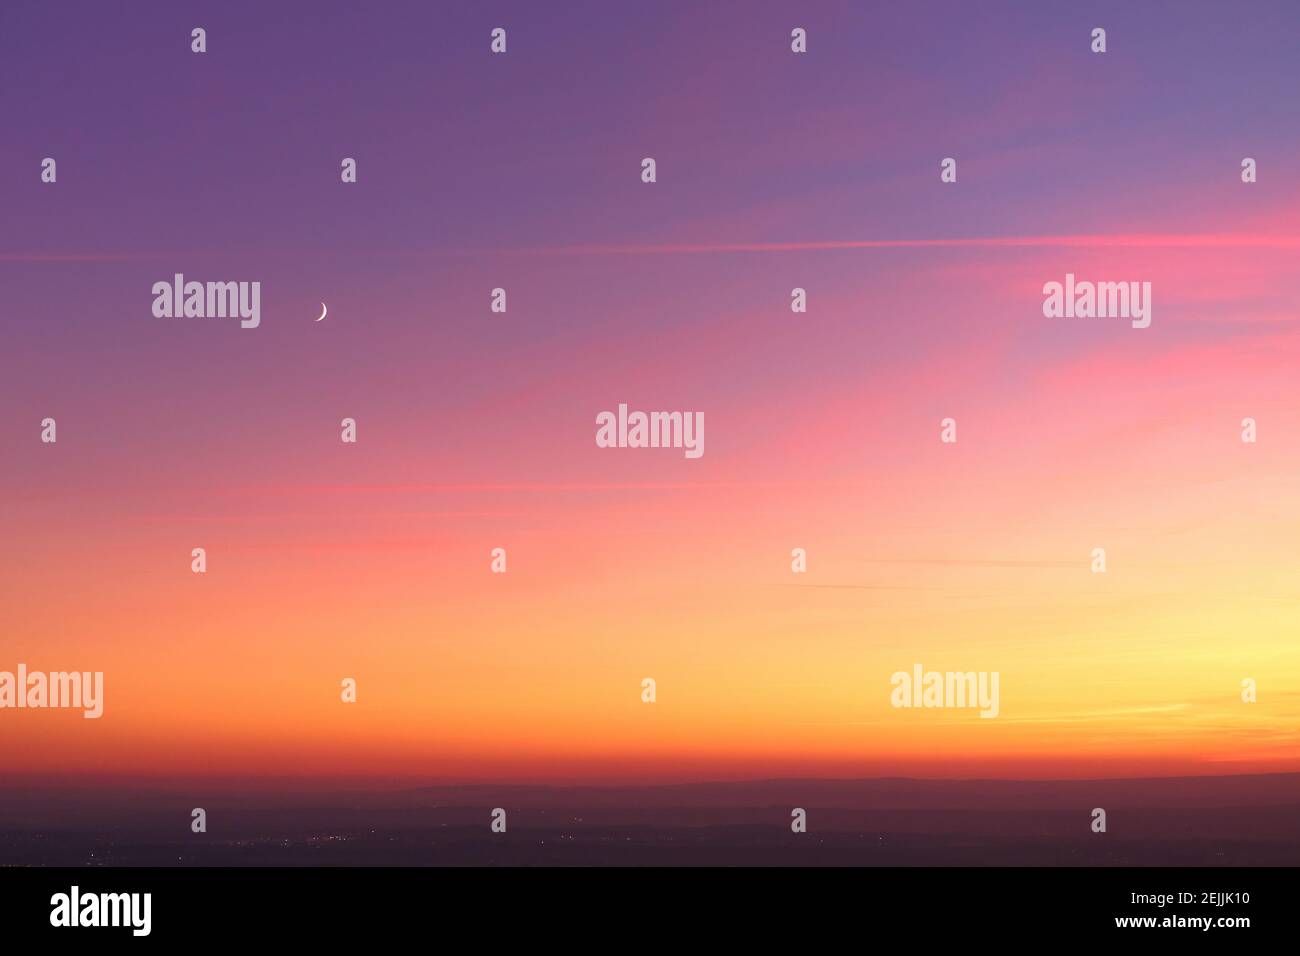 Evening colorful purple-pink sky with red clouds and orange horizon, crescent moon. Aerial photography, orange sky over the whole photo. Stock Photo